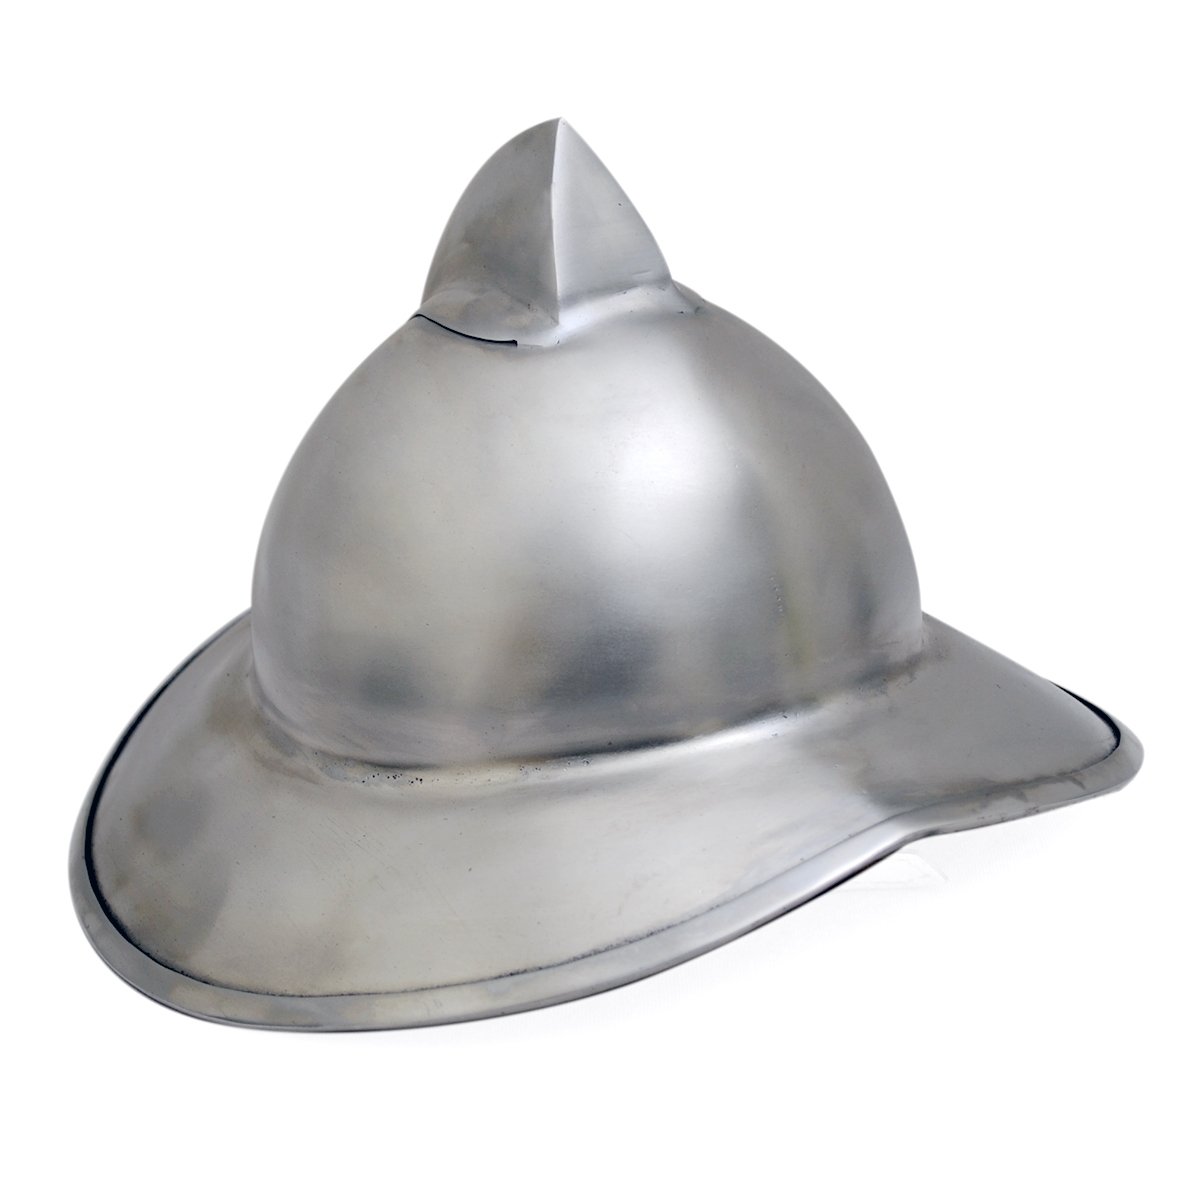 Early Kettle Hat from maciejowski Bible - C. 1250, Size L